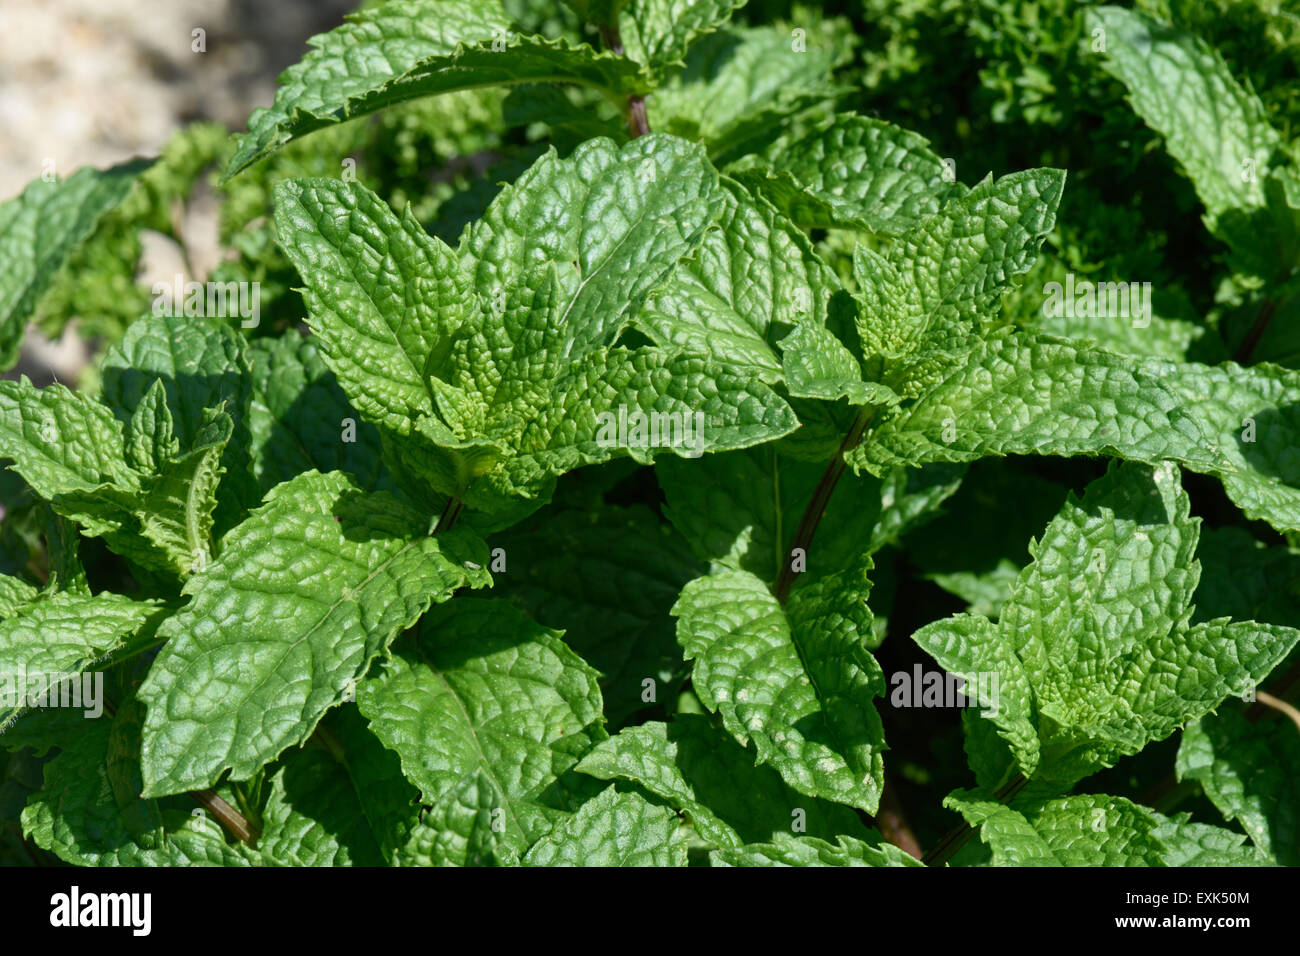 Kitchen herb - spearmint leaves Stock Photo